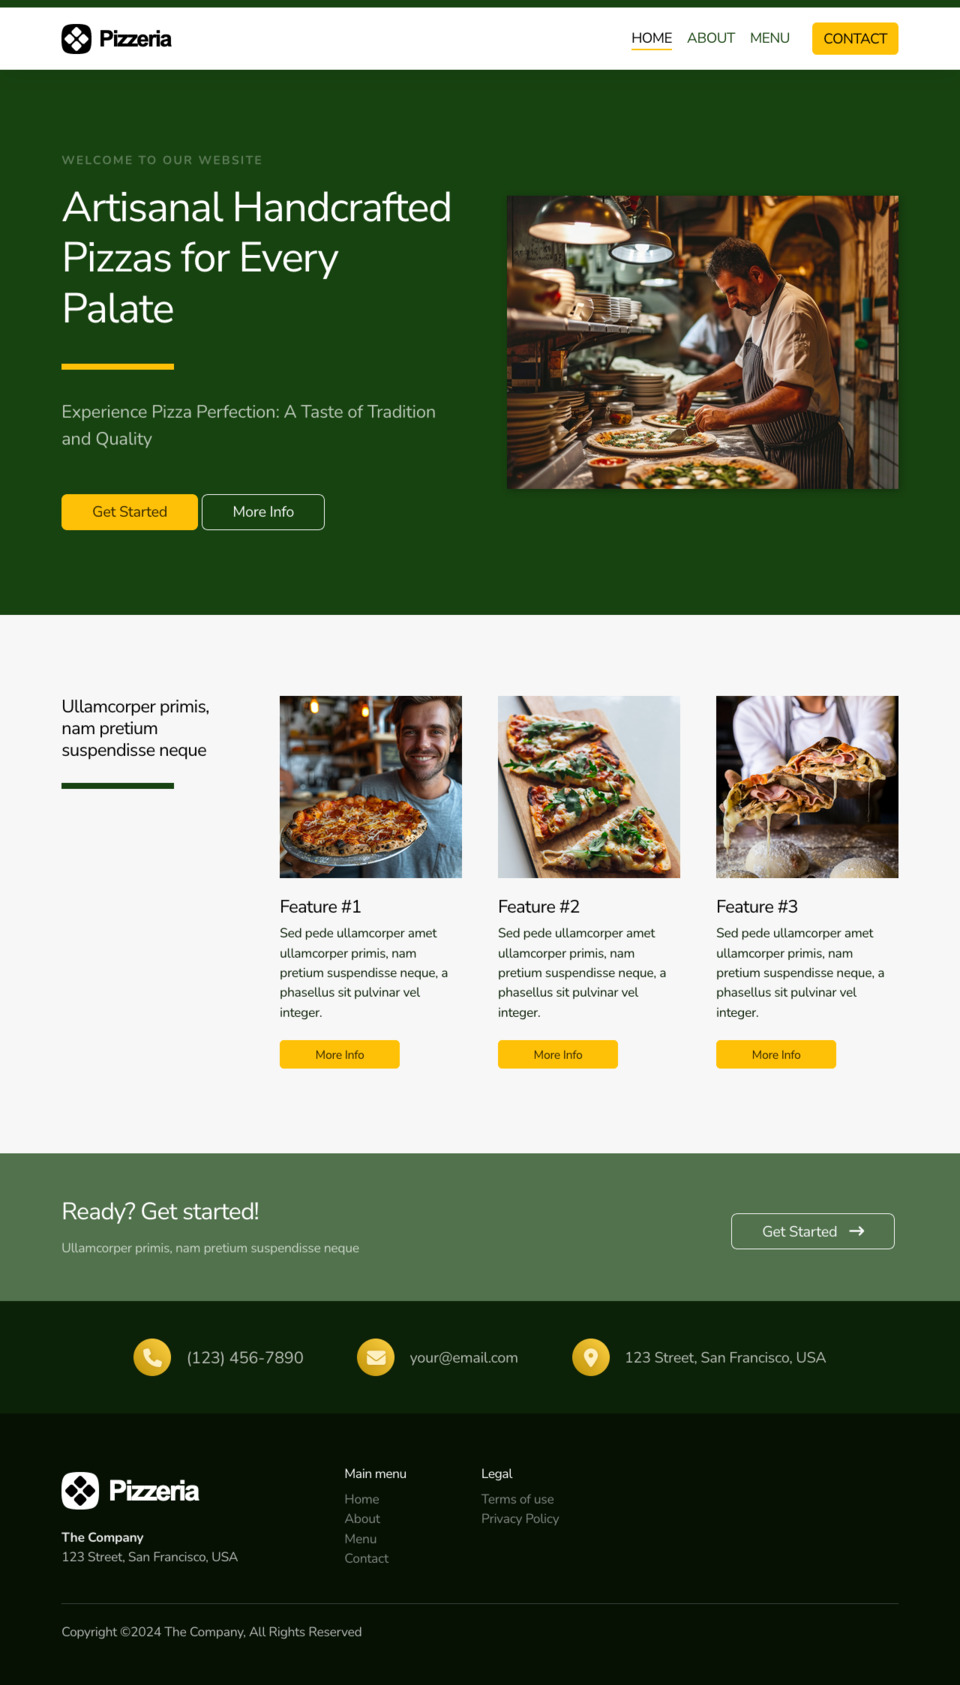 Pizzeria Website Template - Ideal for pizza restaurants, Italian eateries, diners, and small food businesses.